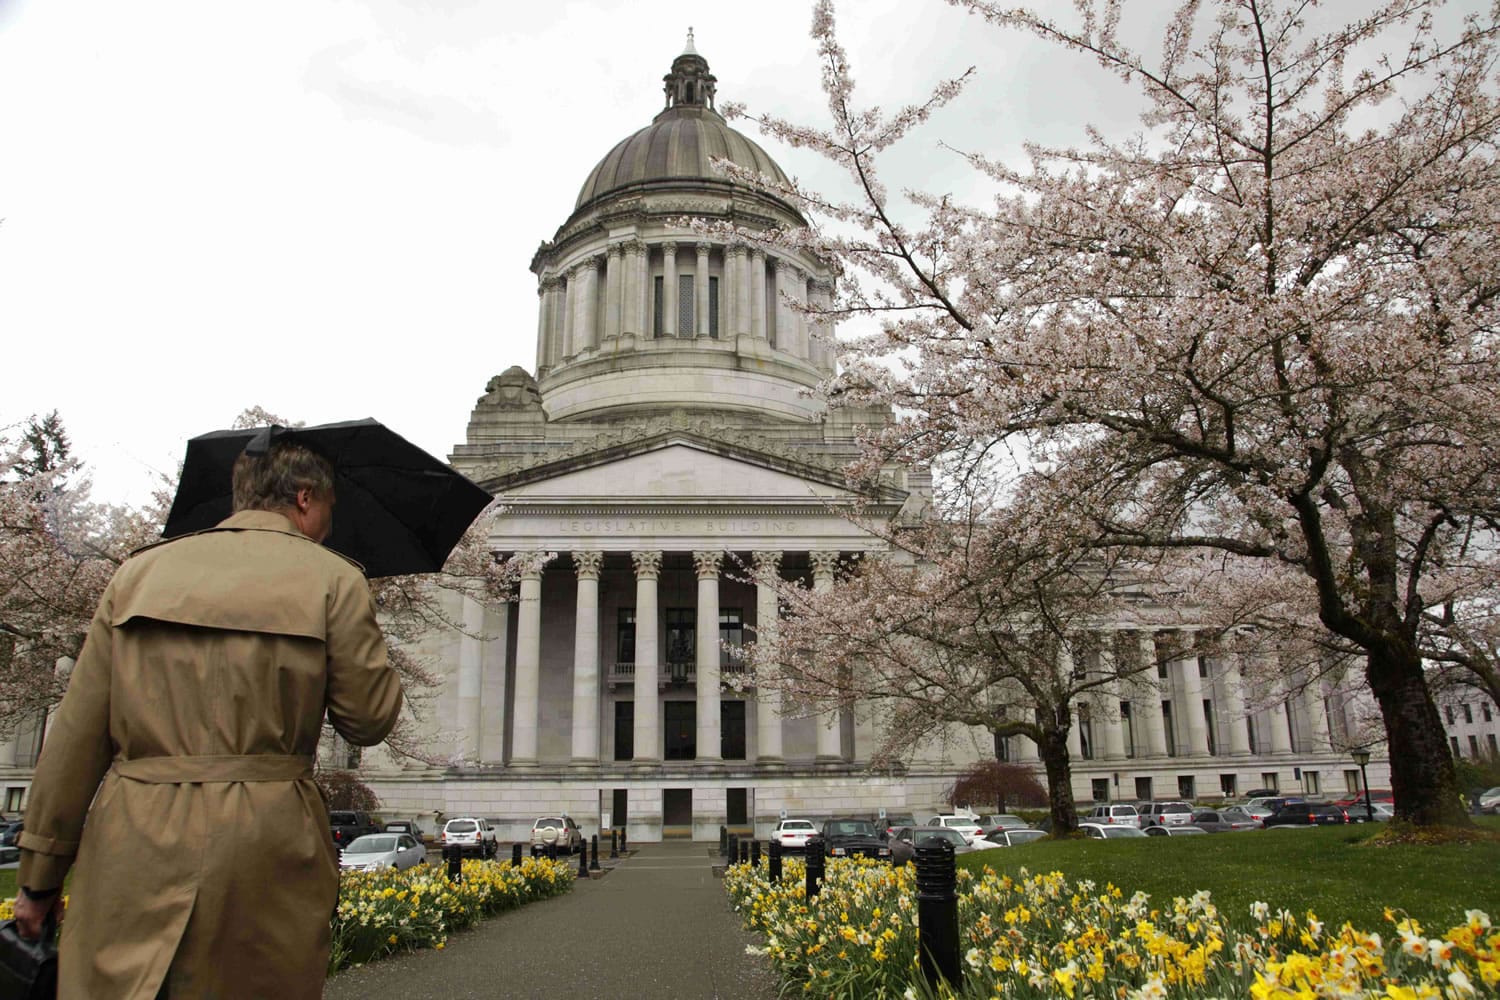 A pedestrian passes by with an umbrella on a rainy day in 2011 at the Capitol in Olympia.